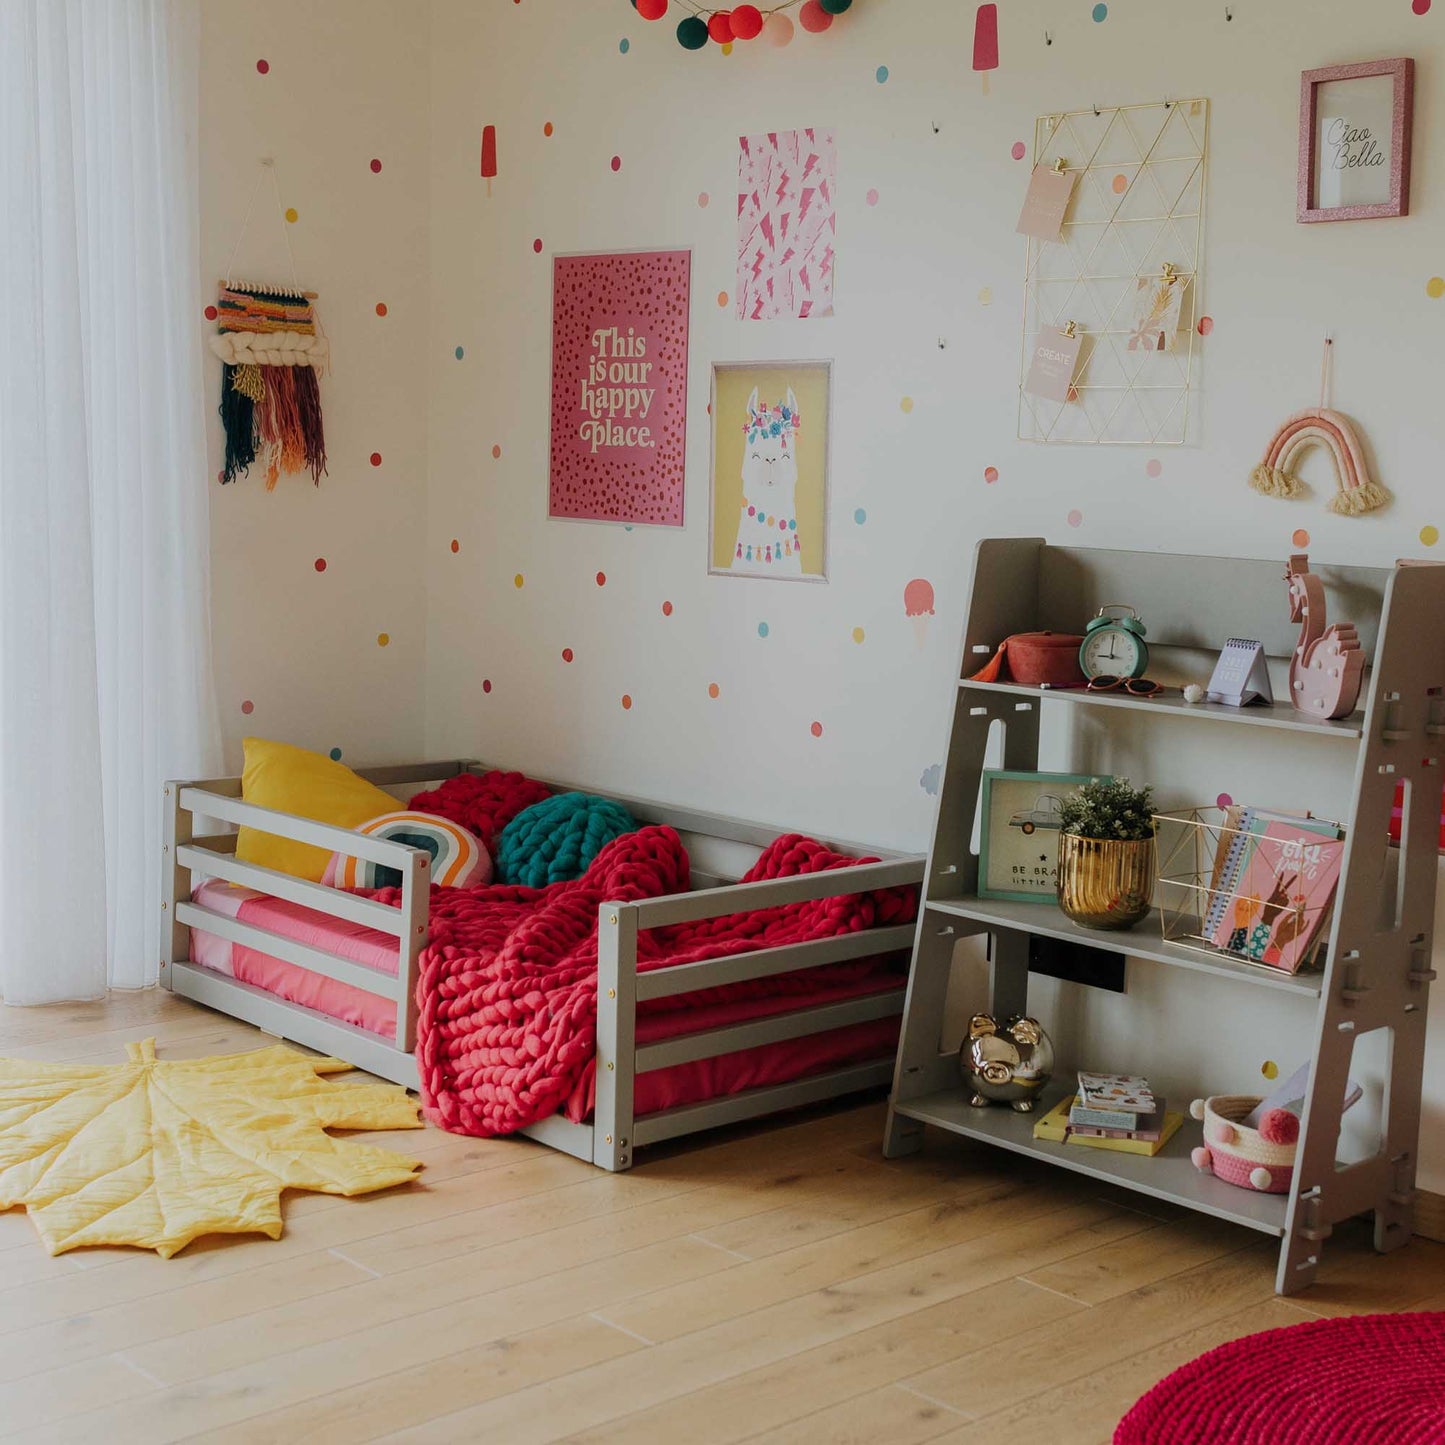 A children's room with a colorful polka dot design, featuring an independent sleeping space with the "Sweet Home From Wood" floor-level kids' bed with a horizontal rail fence for restful nights.